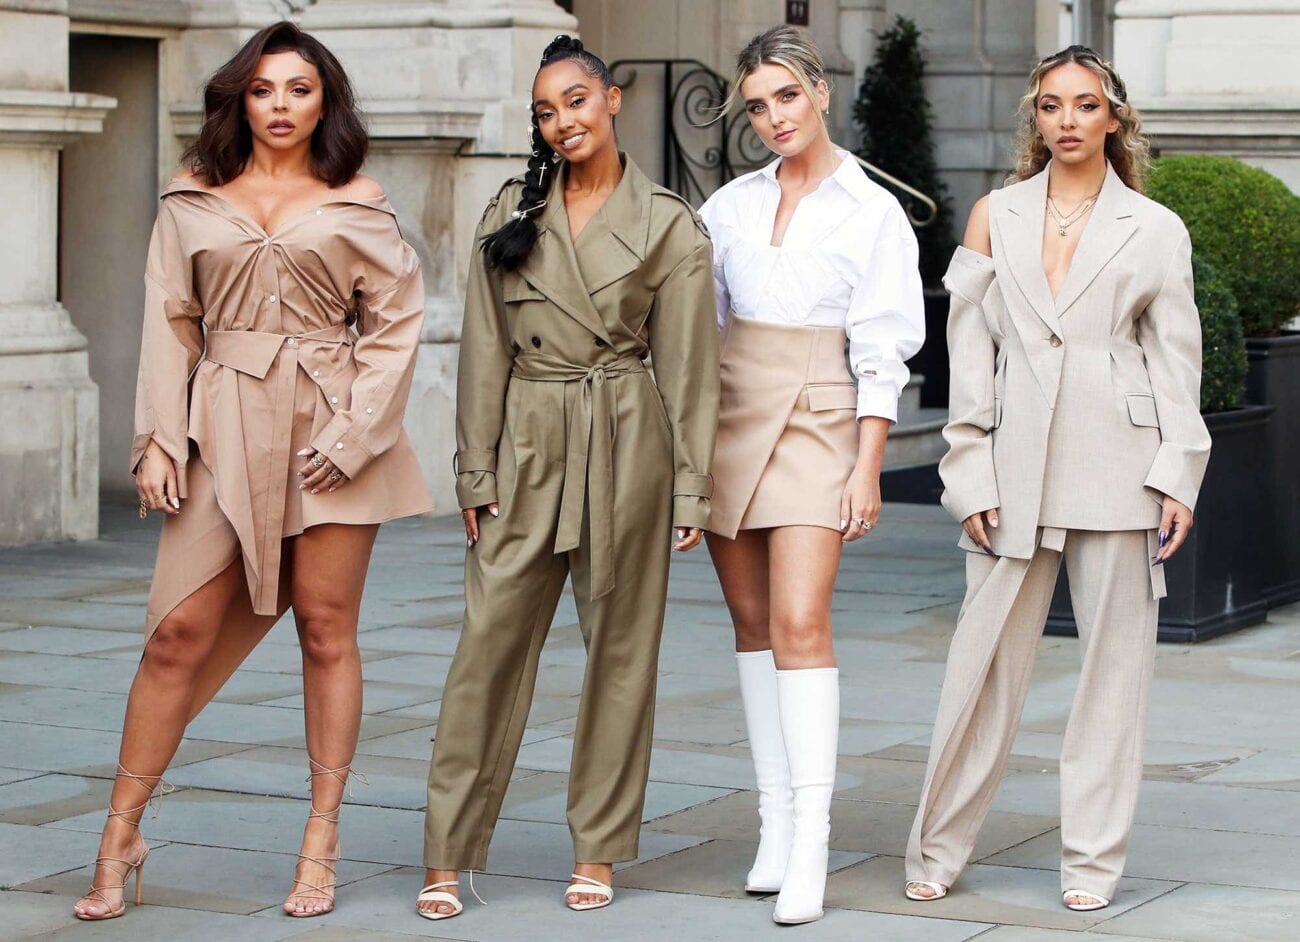 It was announced that one of the Little Mix members Jesy Nelson has exited after nine years. Here's everything that happened.